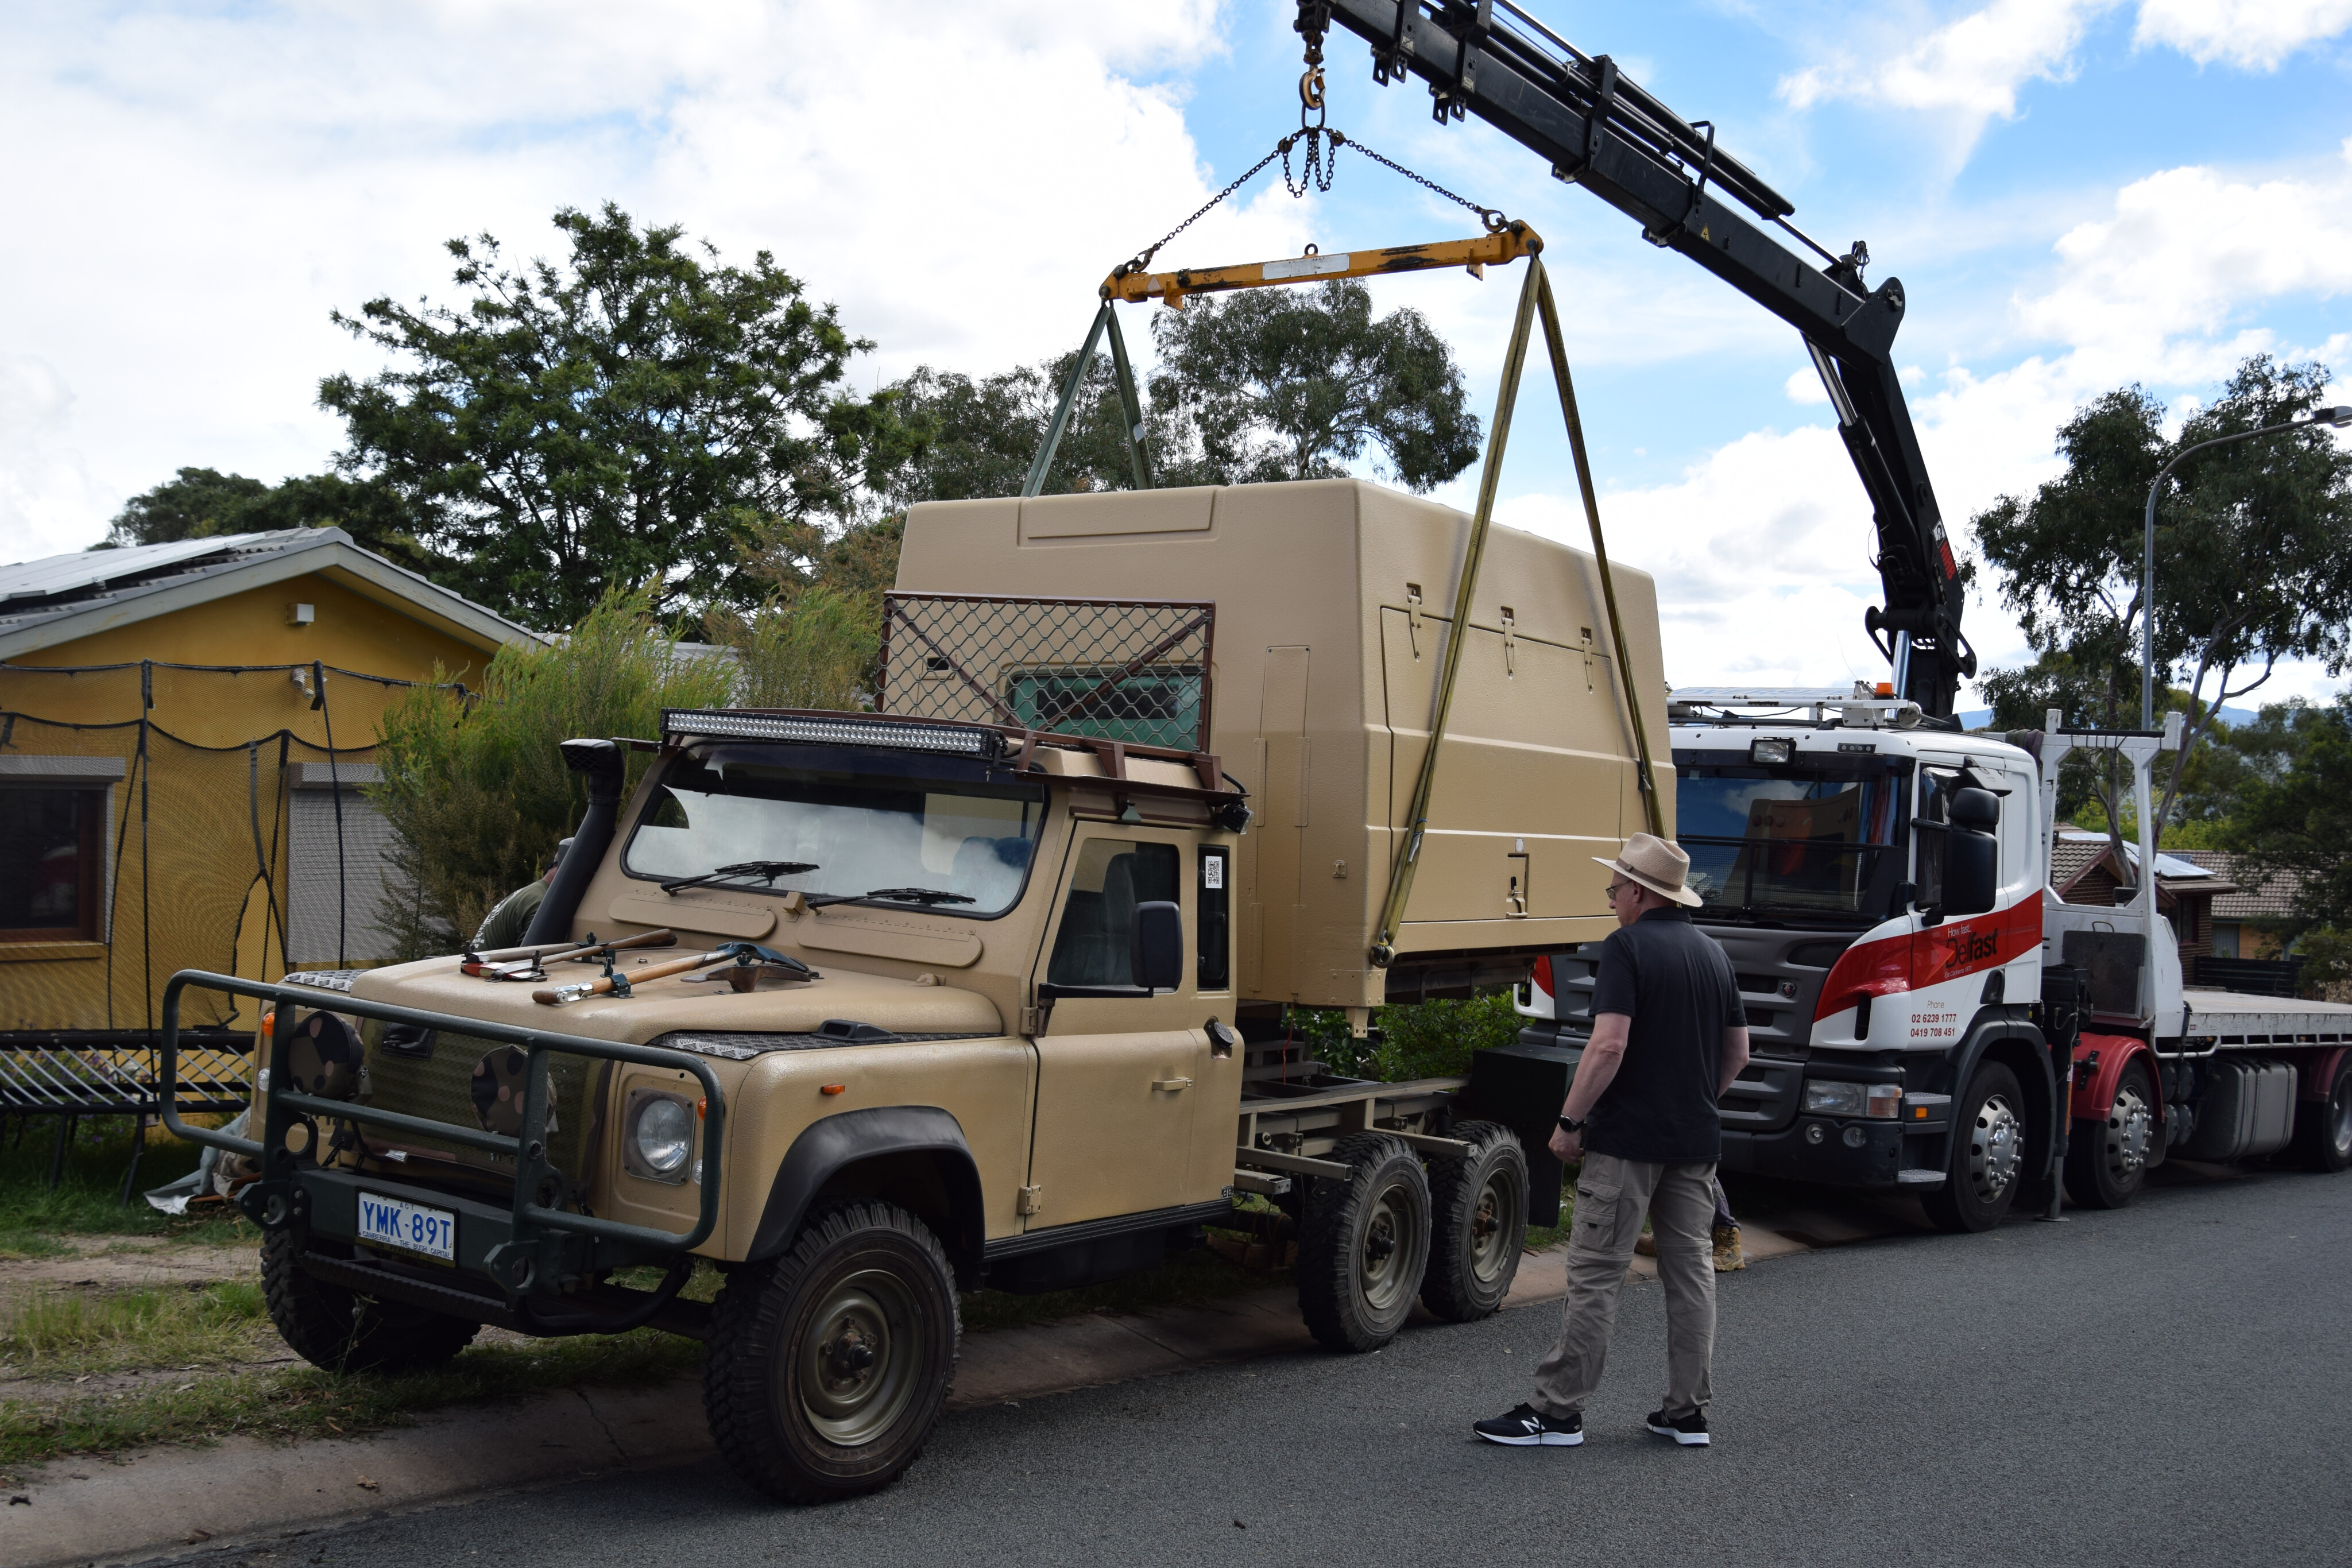 75c42875/land rover 110 perentie 6x6 gmv we had to call in the big guns to mount the canopy module JPG